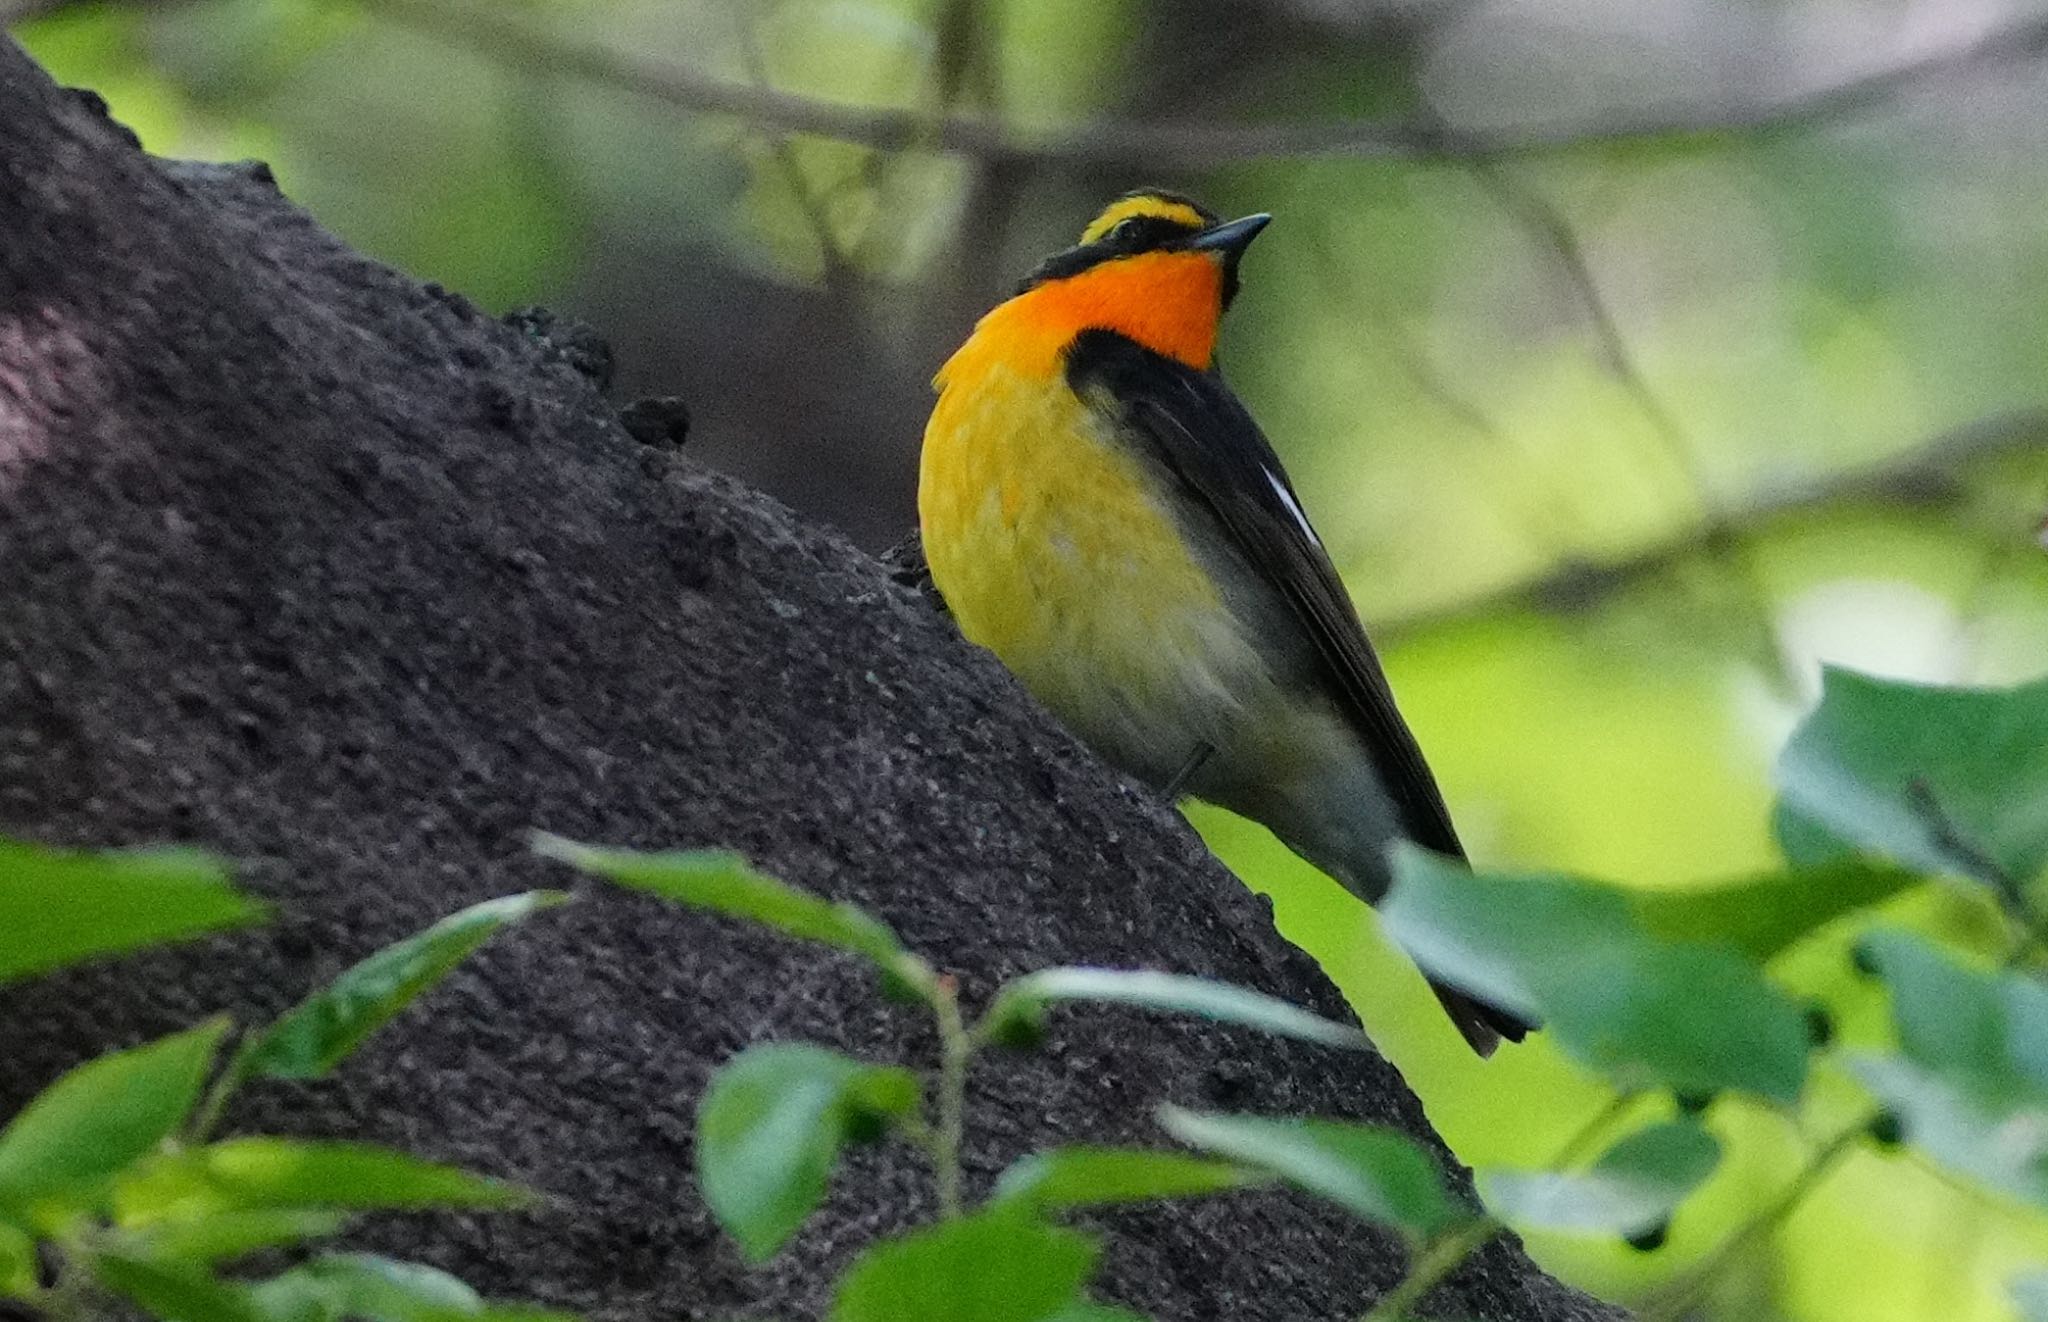 Photo of Narcissus Flycatcher at 天王寺公園(大阪市) by アルキュオン